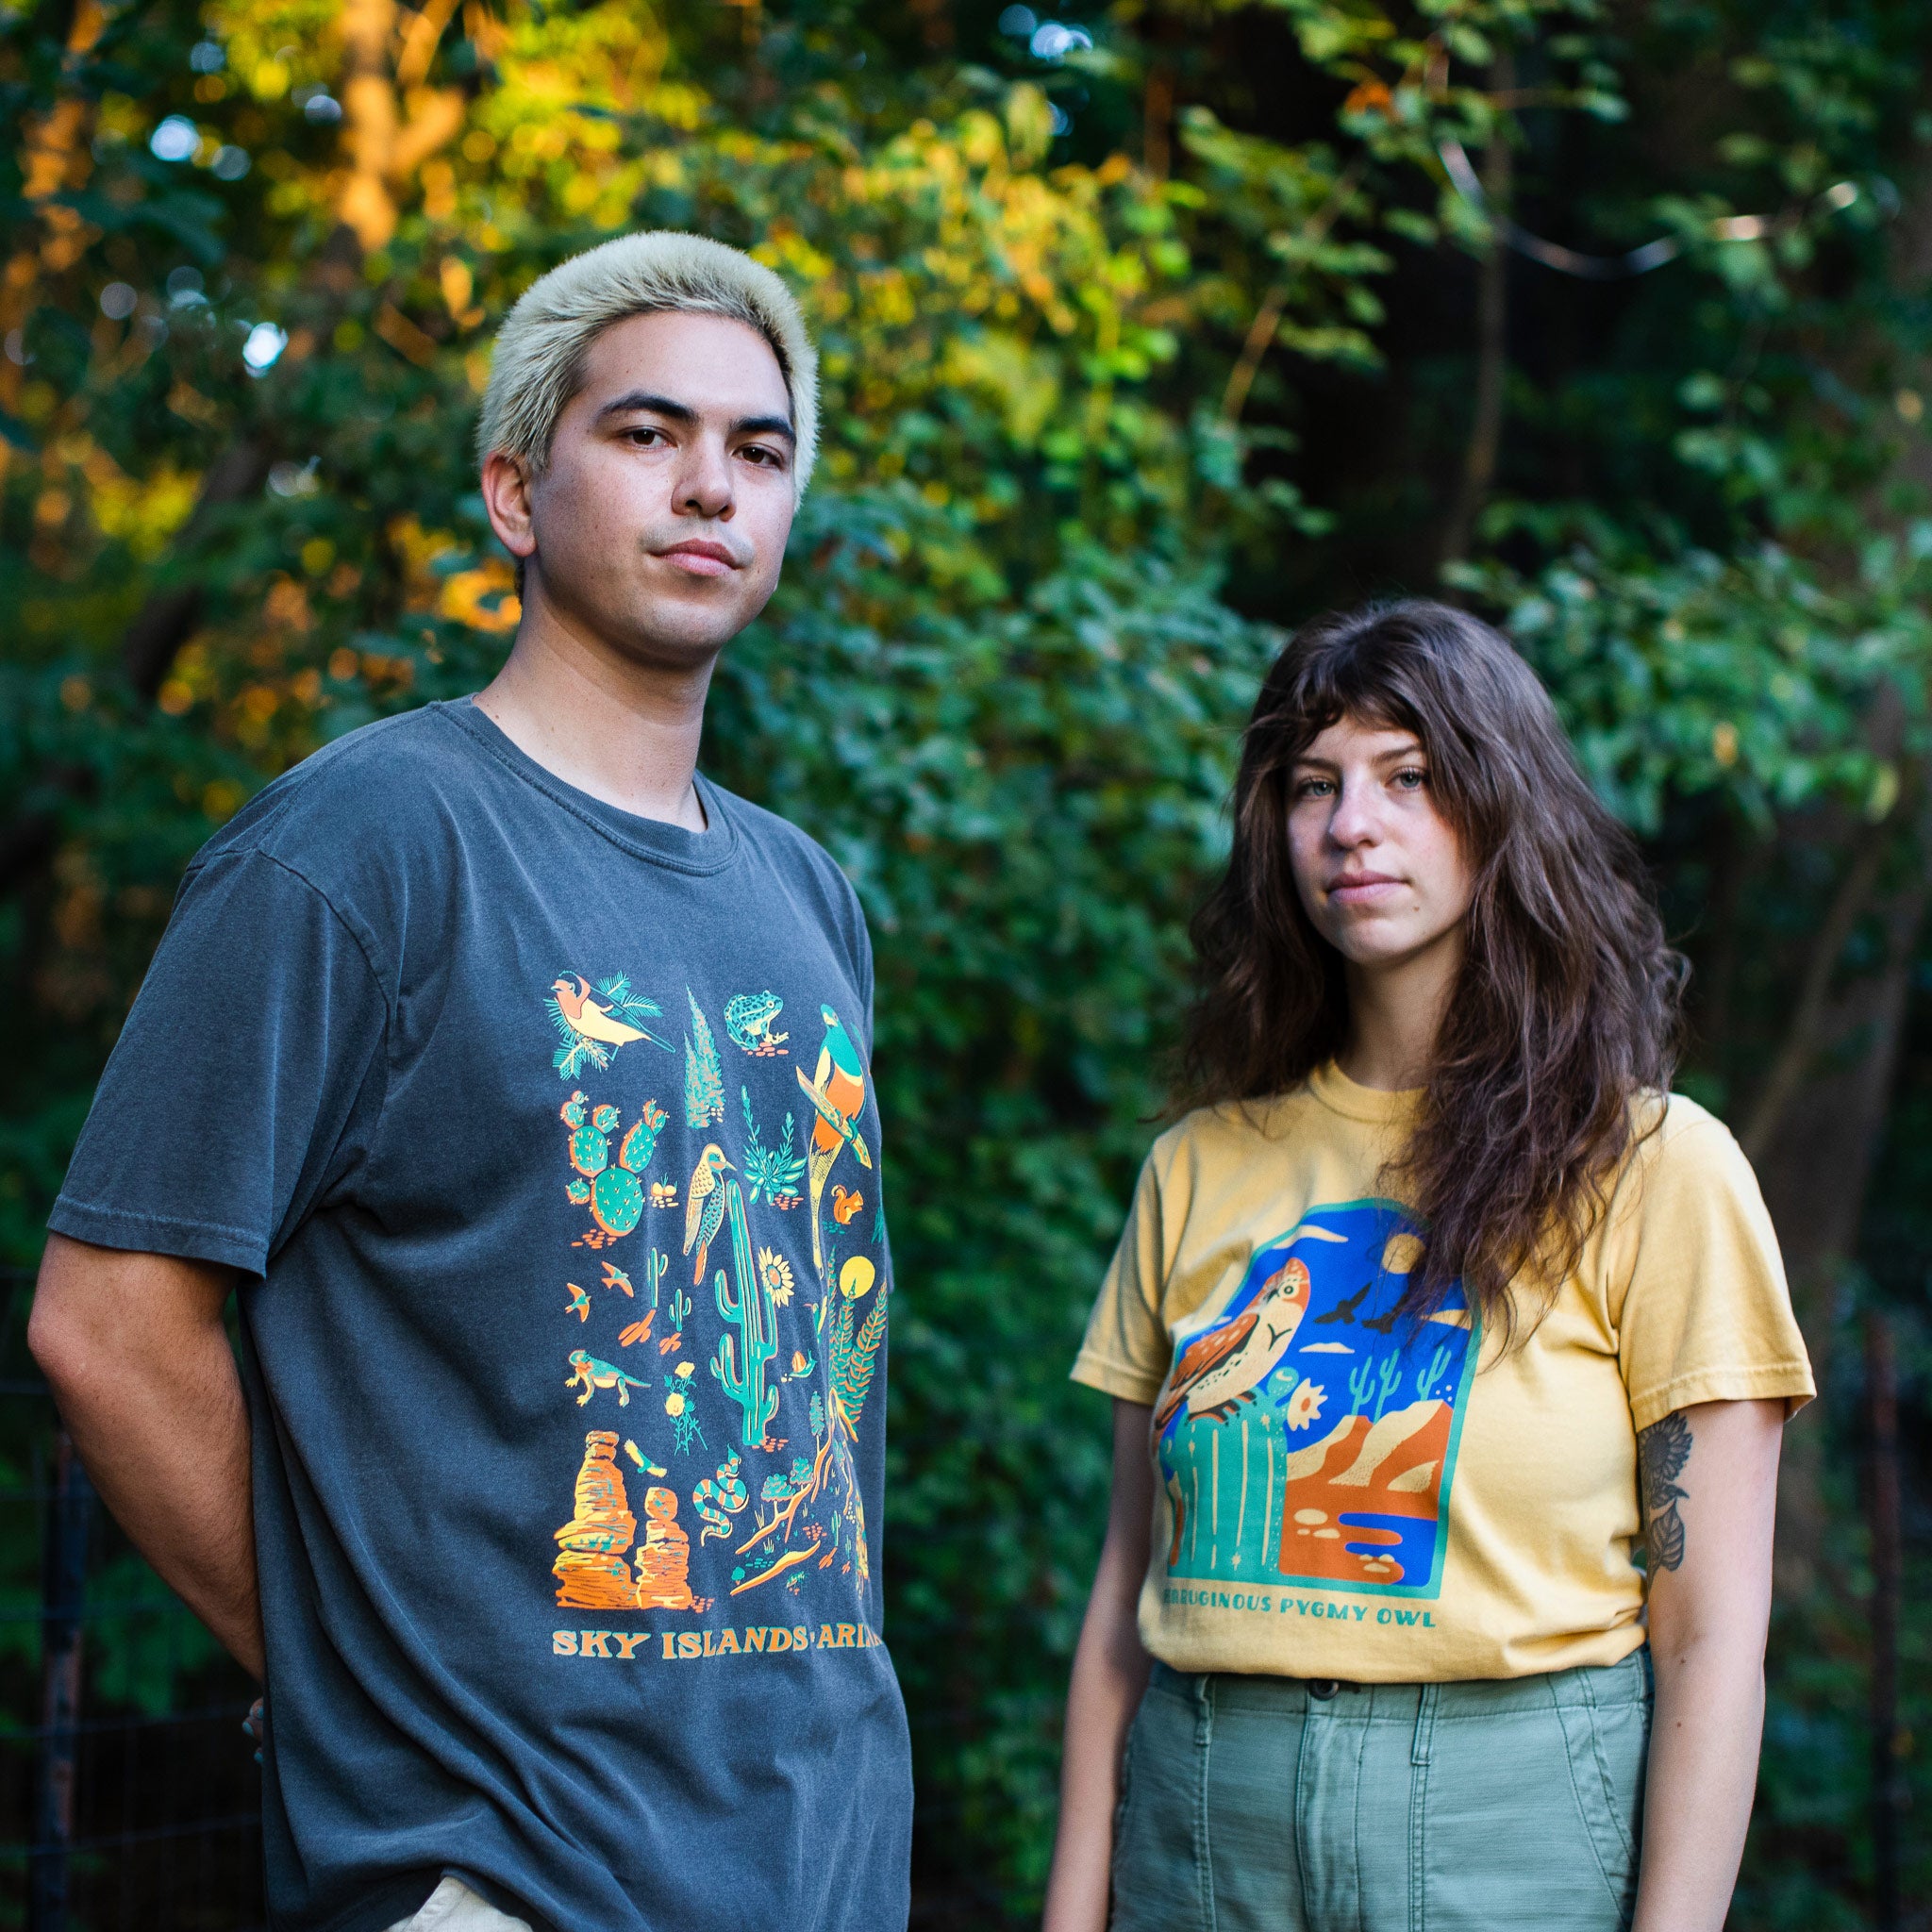 Photo of a man wearing a Sky Island, Arizona shirt and a woman wearing a shirt with an owl on a cactus